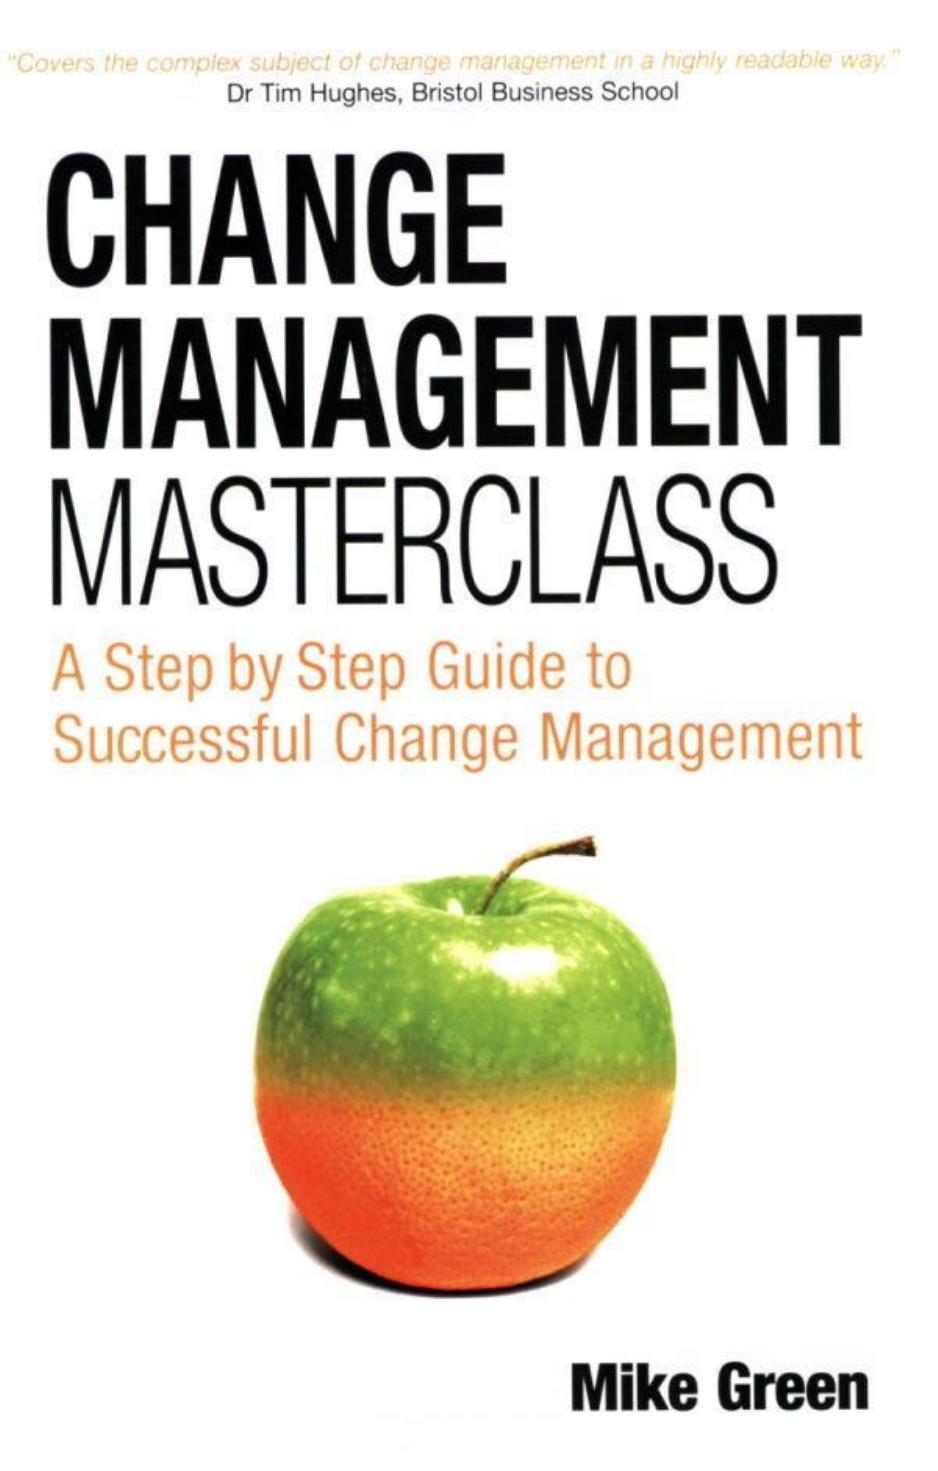 Change management masterclass : a step by step guide to successful change management